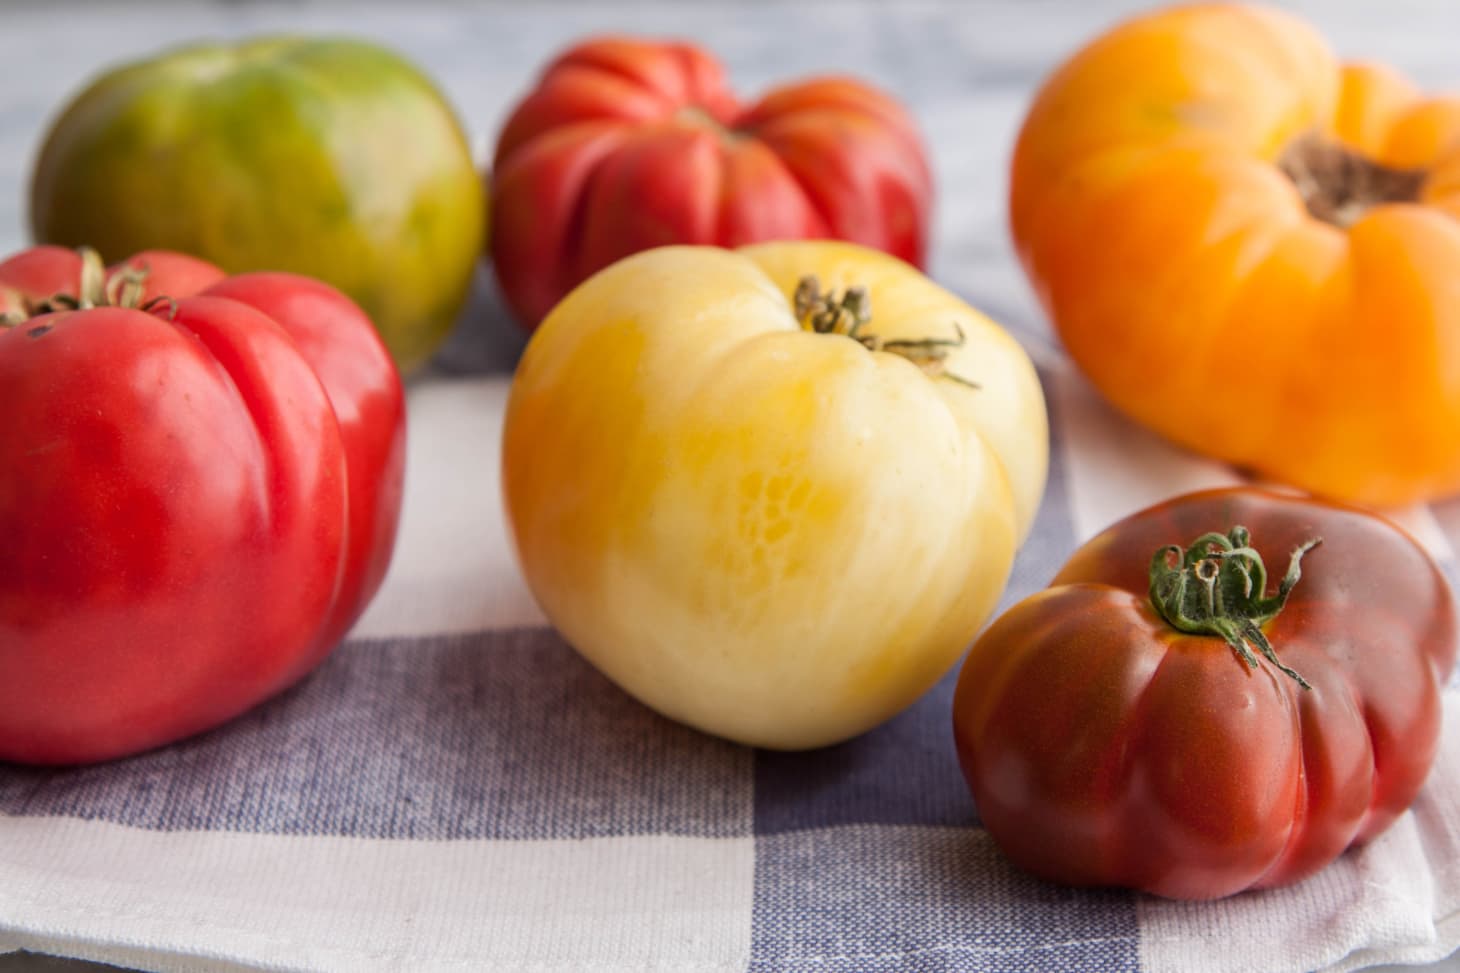 Are Heirloom Tomatoes Really Worth the Price? | Kitchn